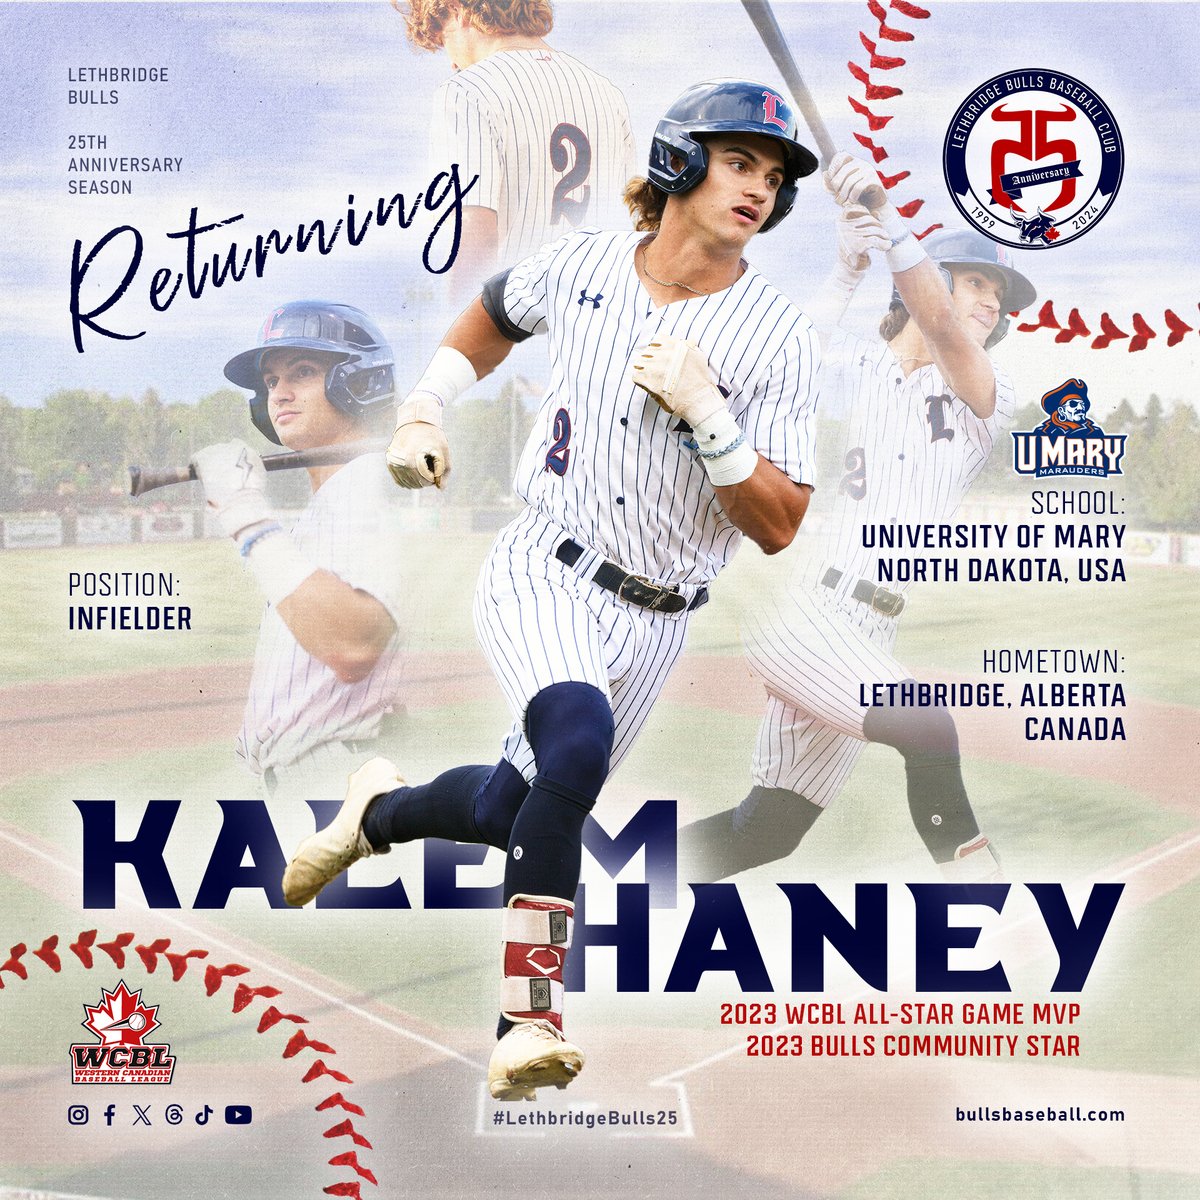 Congratulations to Kalem Haney for being named NSIC Baseball Player of the Week as he continues his fantastic spring season with @UmaryBaseball Learn more here: goumary.com/news/2024/4/30… @kalem_haney @wcbleague #LethbridgeBullsBaseball #LethbridgeBullsRoster #YQL